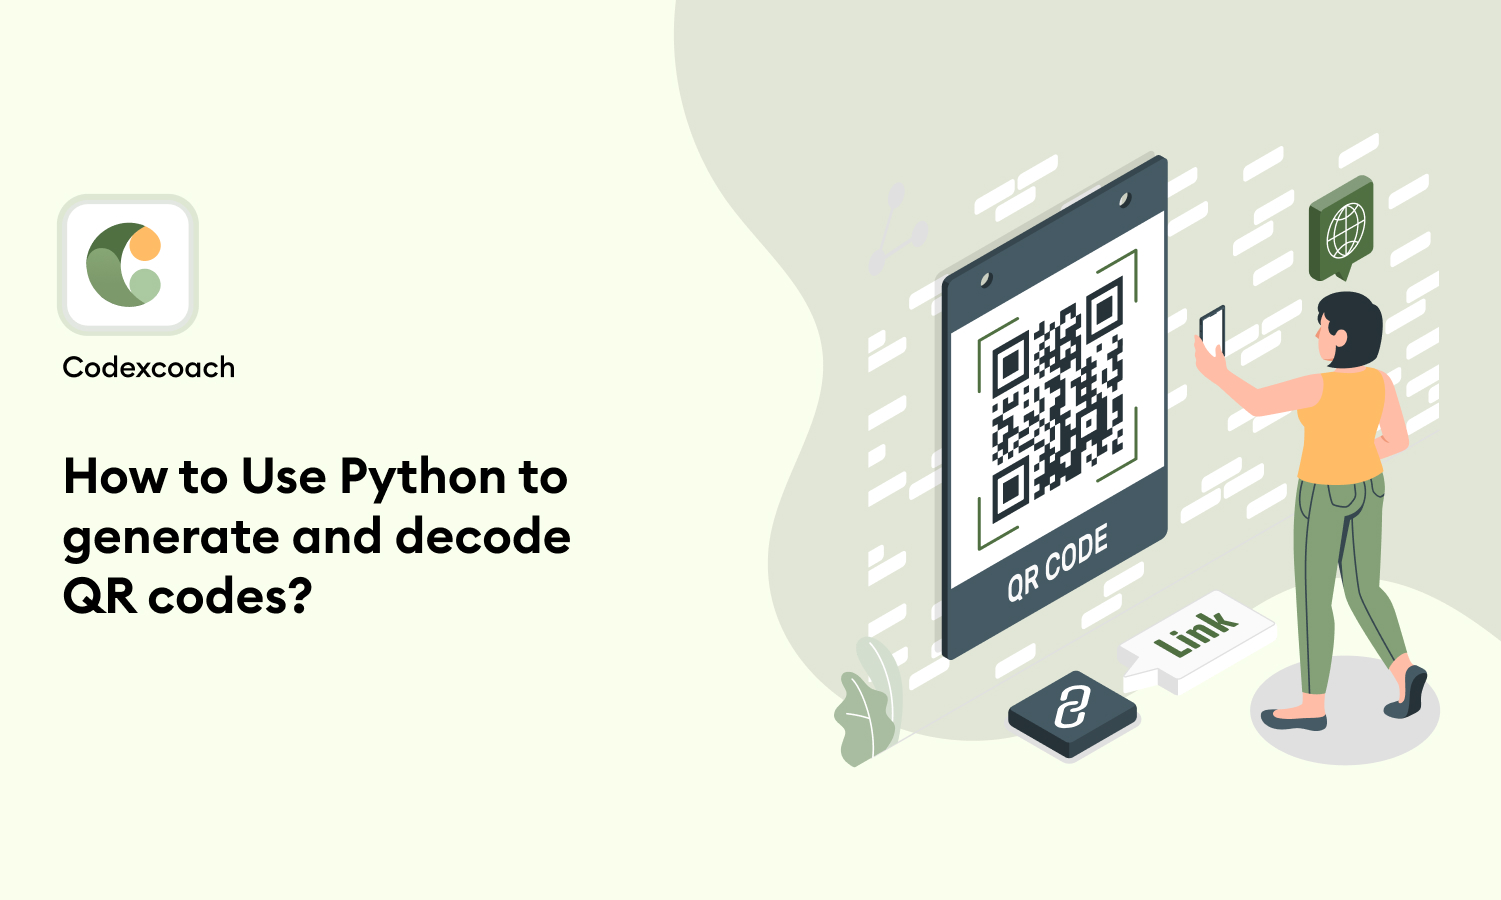 How to Use Python to generate and decode QR codes?